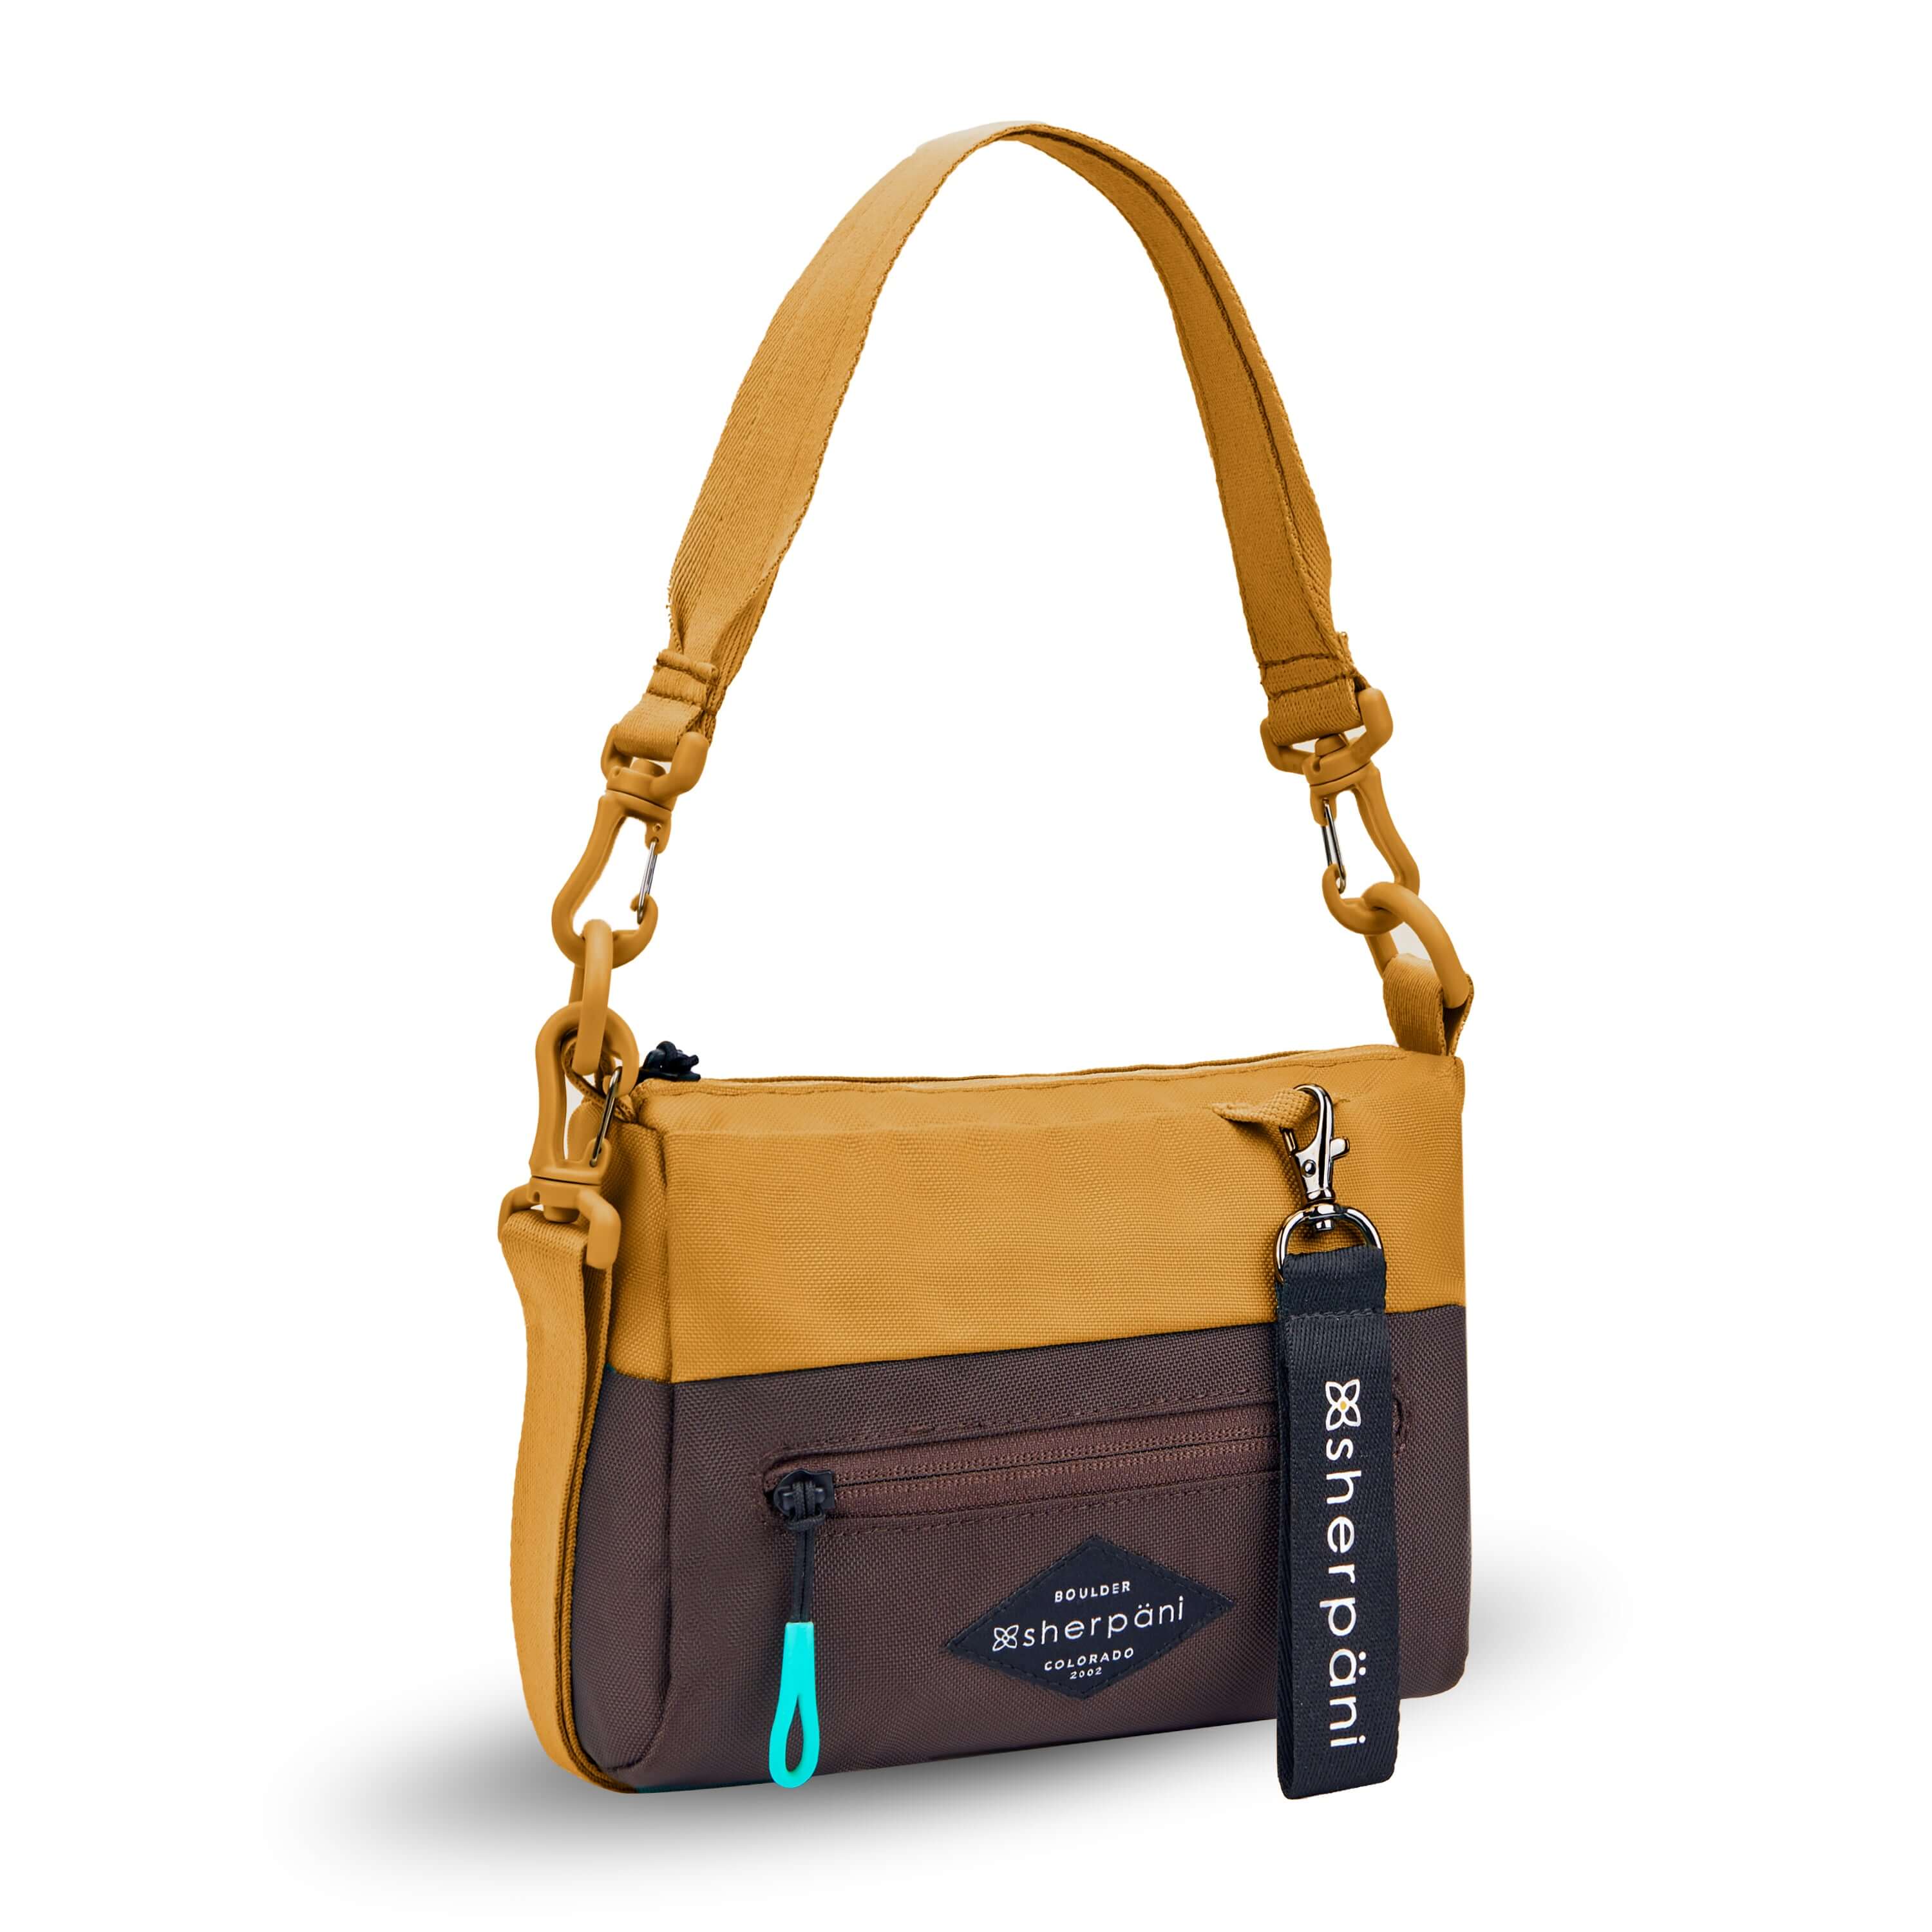 Angled front view of Sherpani's purse, the Skye in Sundial. It is two-toned, the top half of the bag is burnt yellow and the bottom half of the bag is brown. There is an external zipper compartment with an easy-pull zipper accented in aqua. There is a branded Sherpani keychain clipped to the upper right corner. The bag has a detachable short strap and a longer detachable/adjustable crossbody strap. 